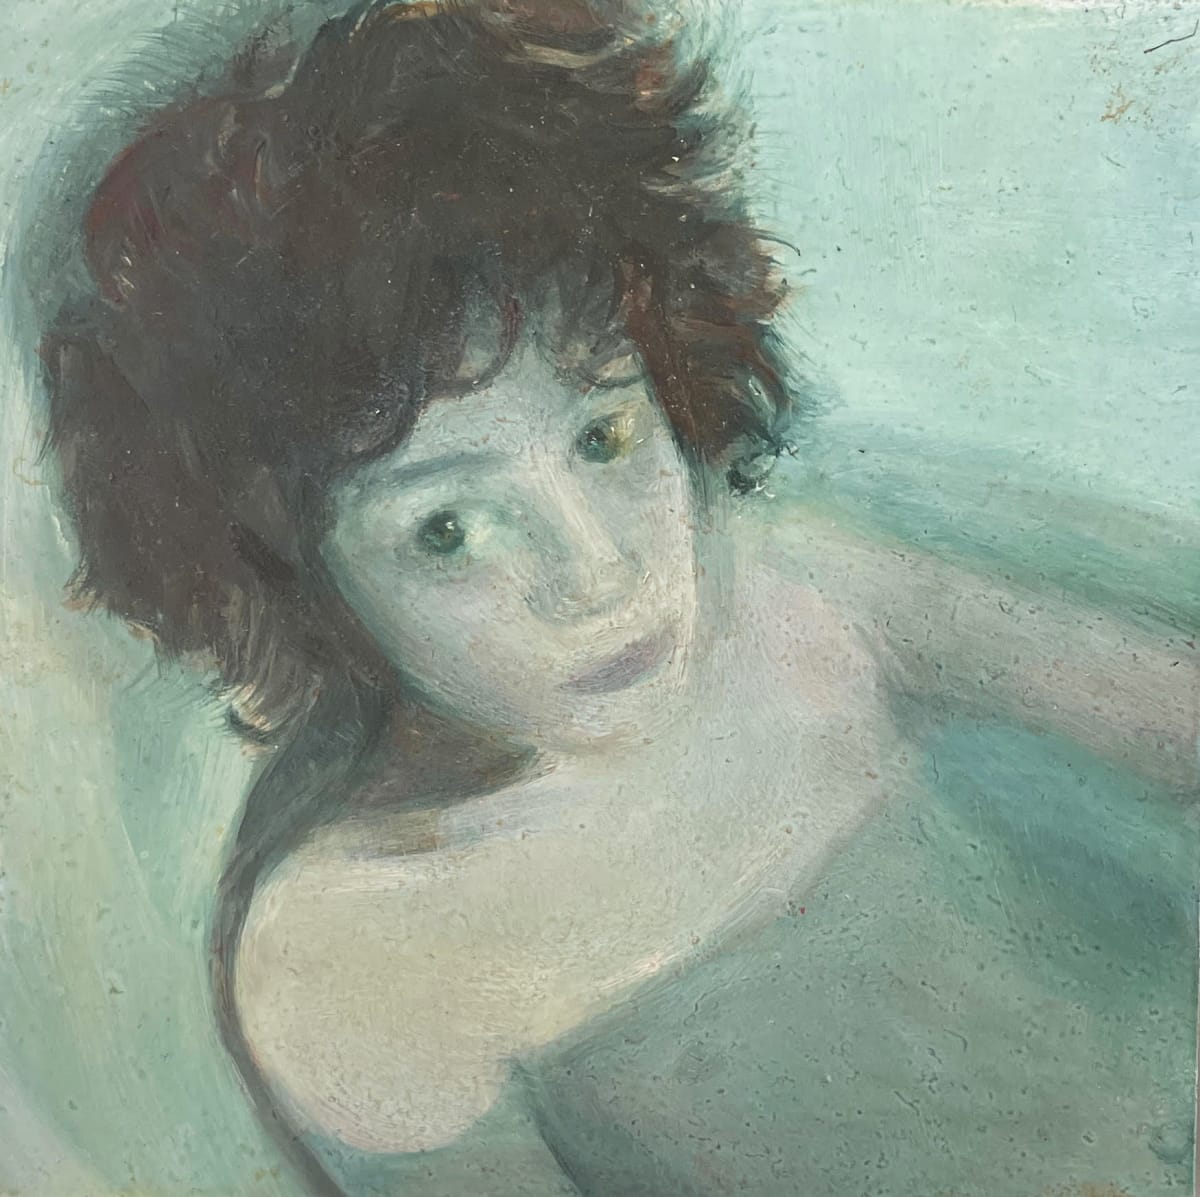 Max in Tub by Nan Ring  Image: Max in Tub, oil on panel, 4 x 4 inches, 2012